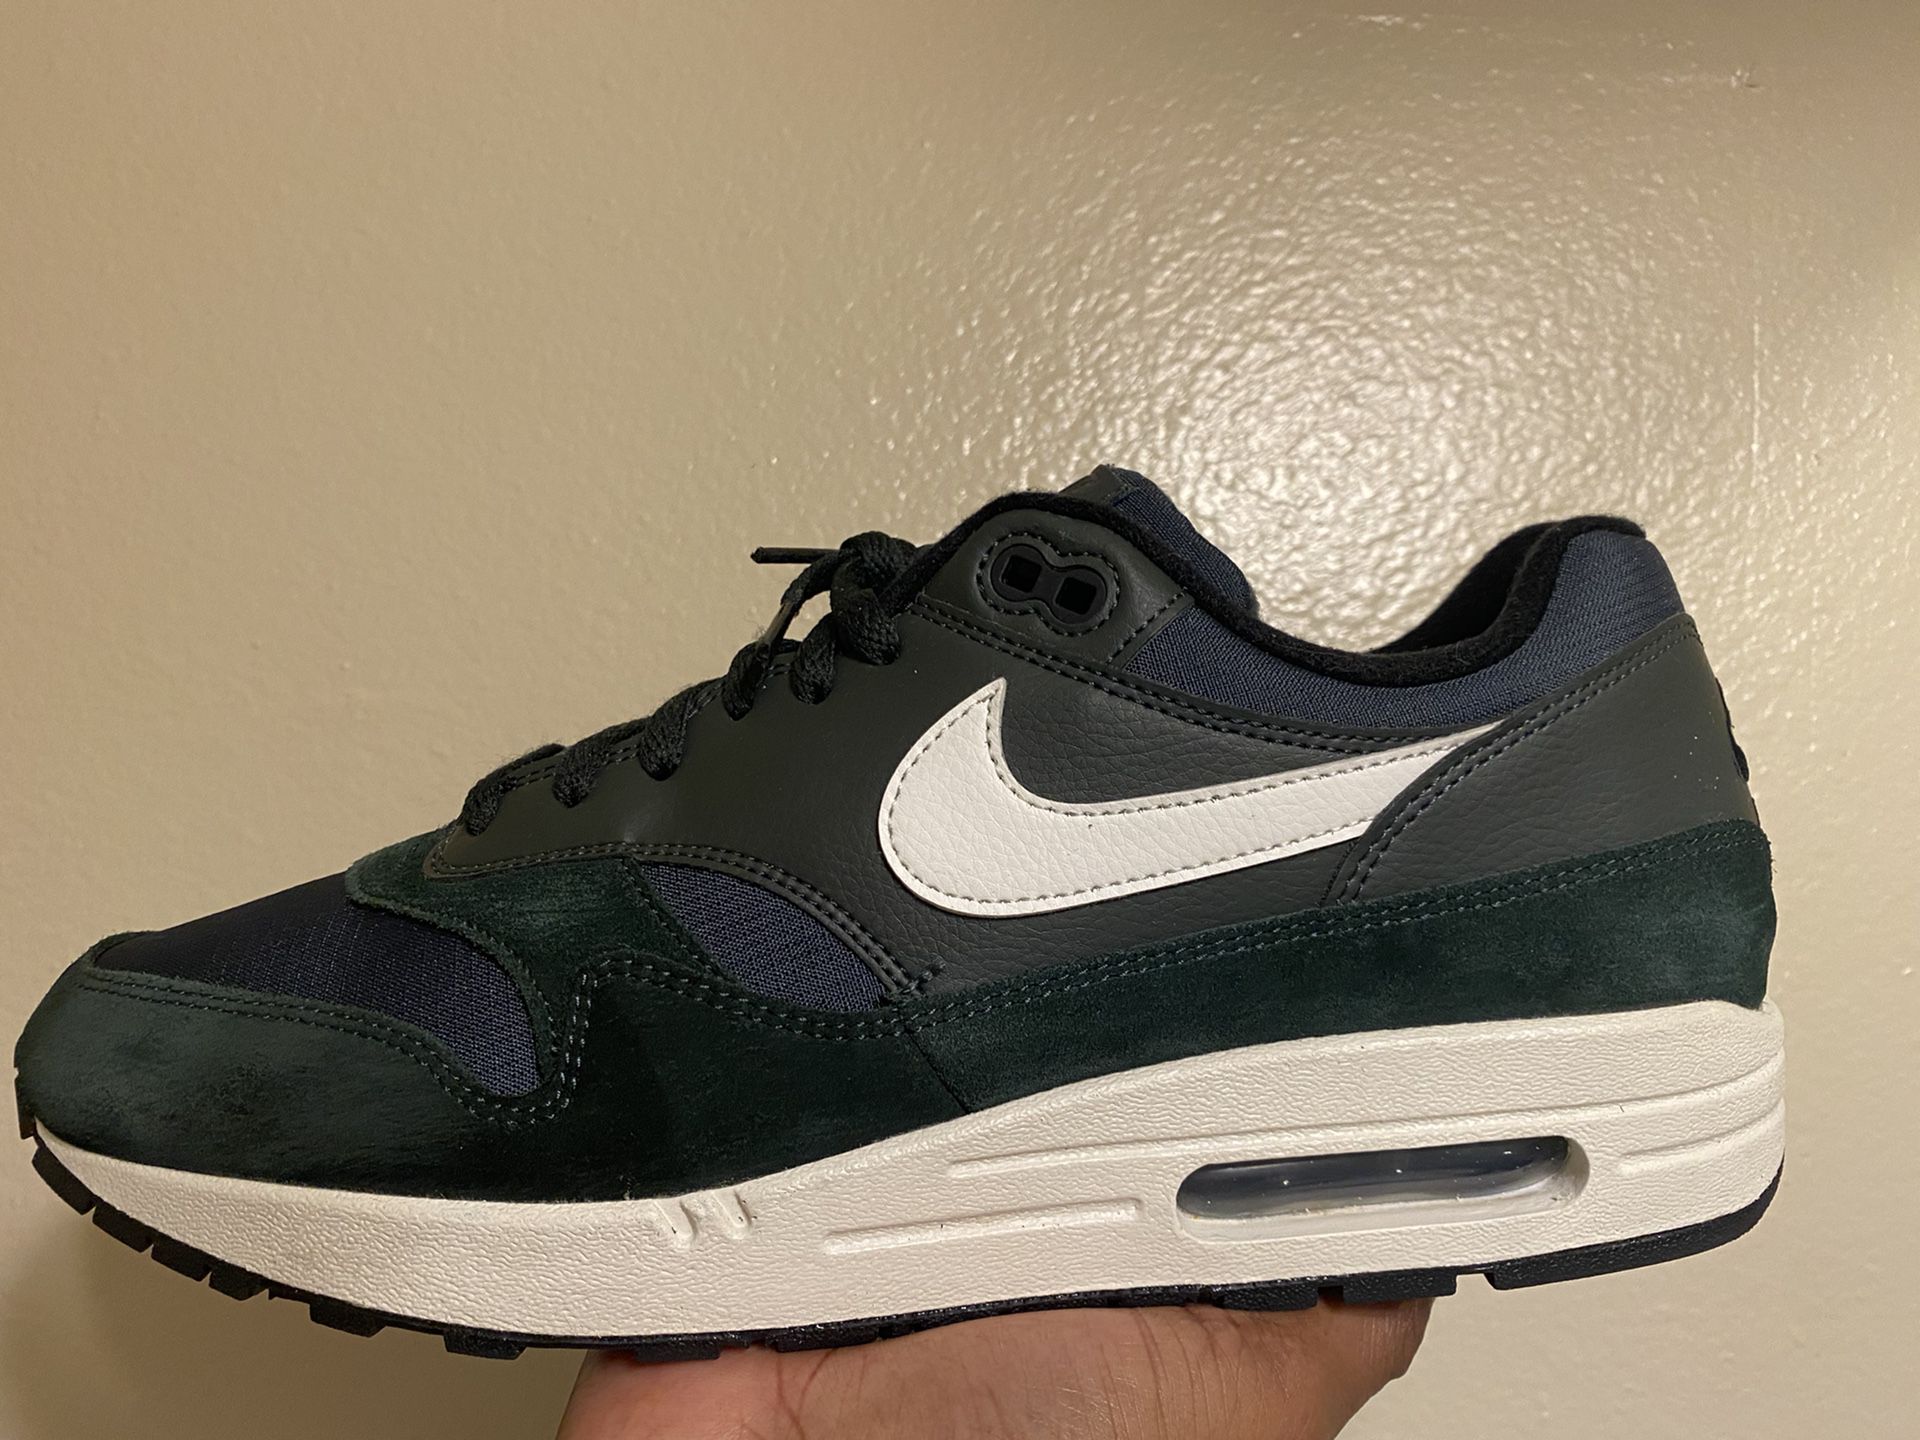 Nike Air Max 1 Outdoor Green 2019 Size 12